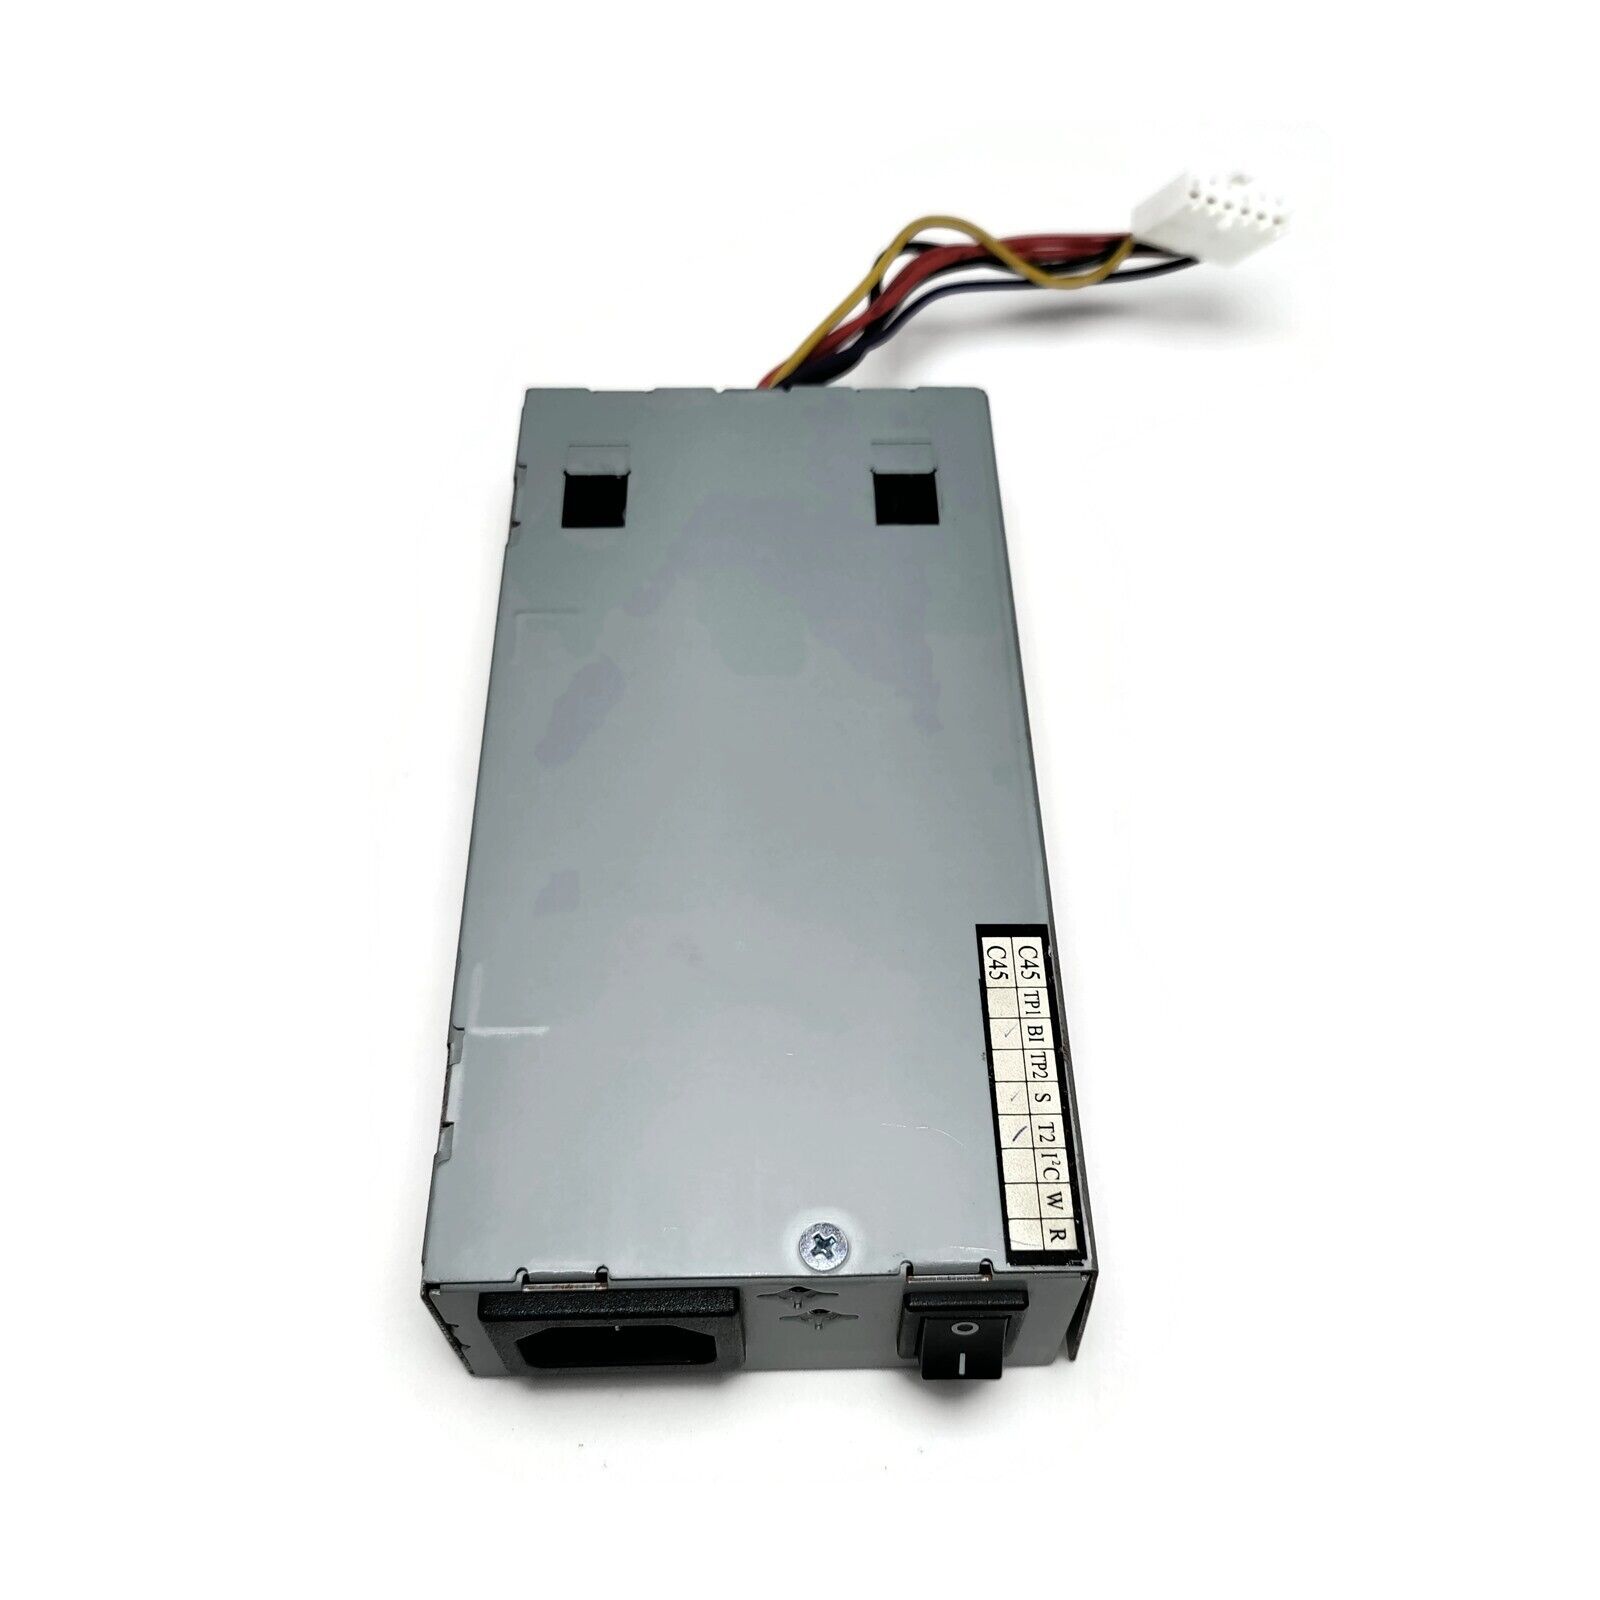 Delta Electronics DPSN-50EB-A Power Supply Assy for Cisco Routers